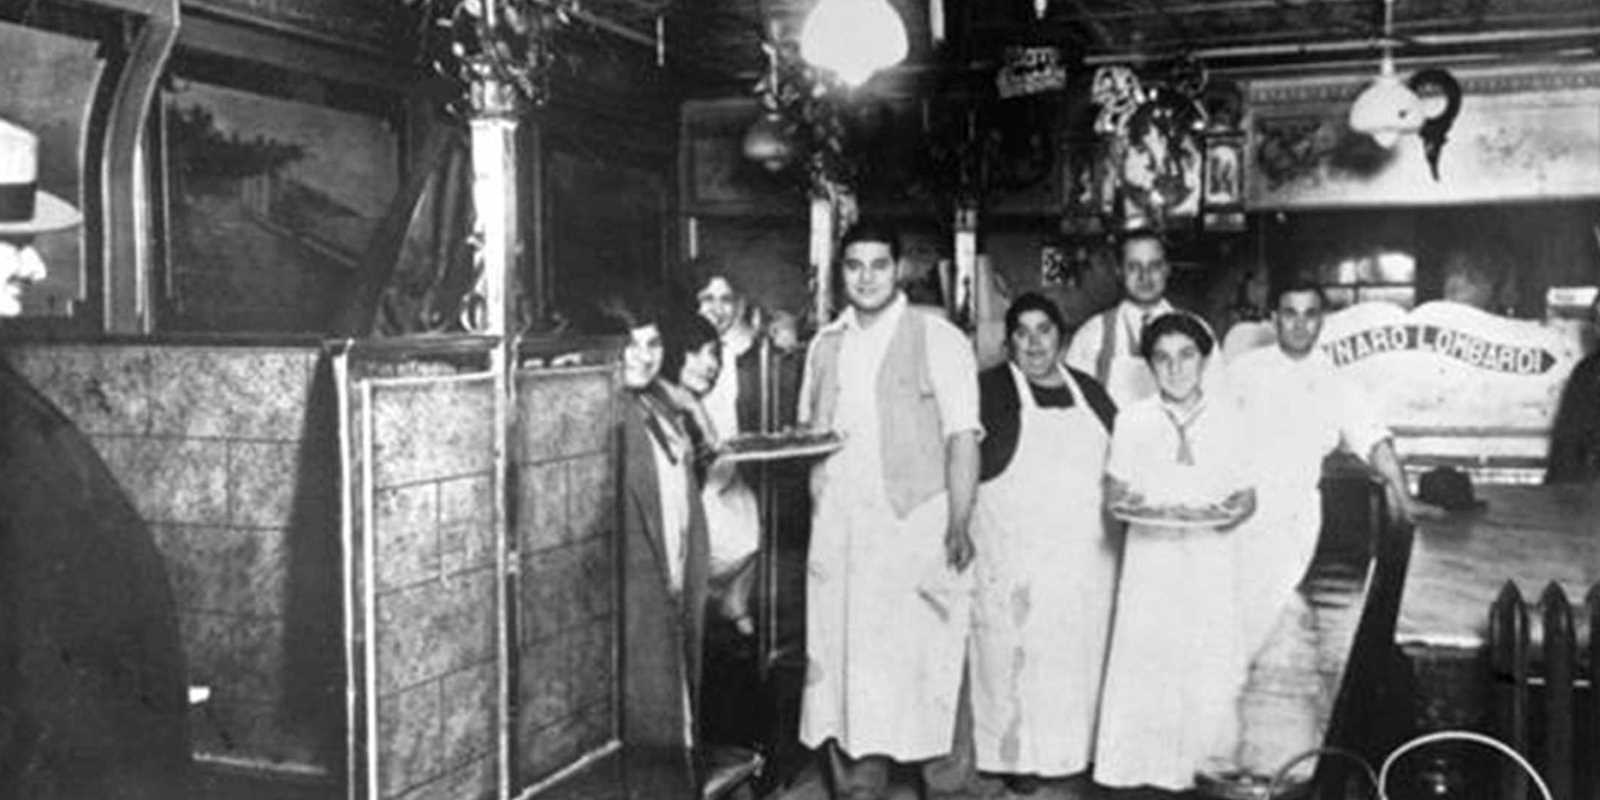 old photo of wait staff in the restaurant